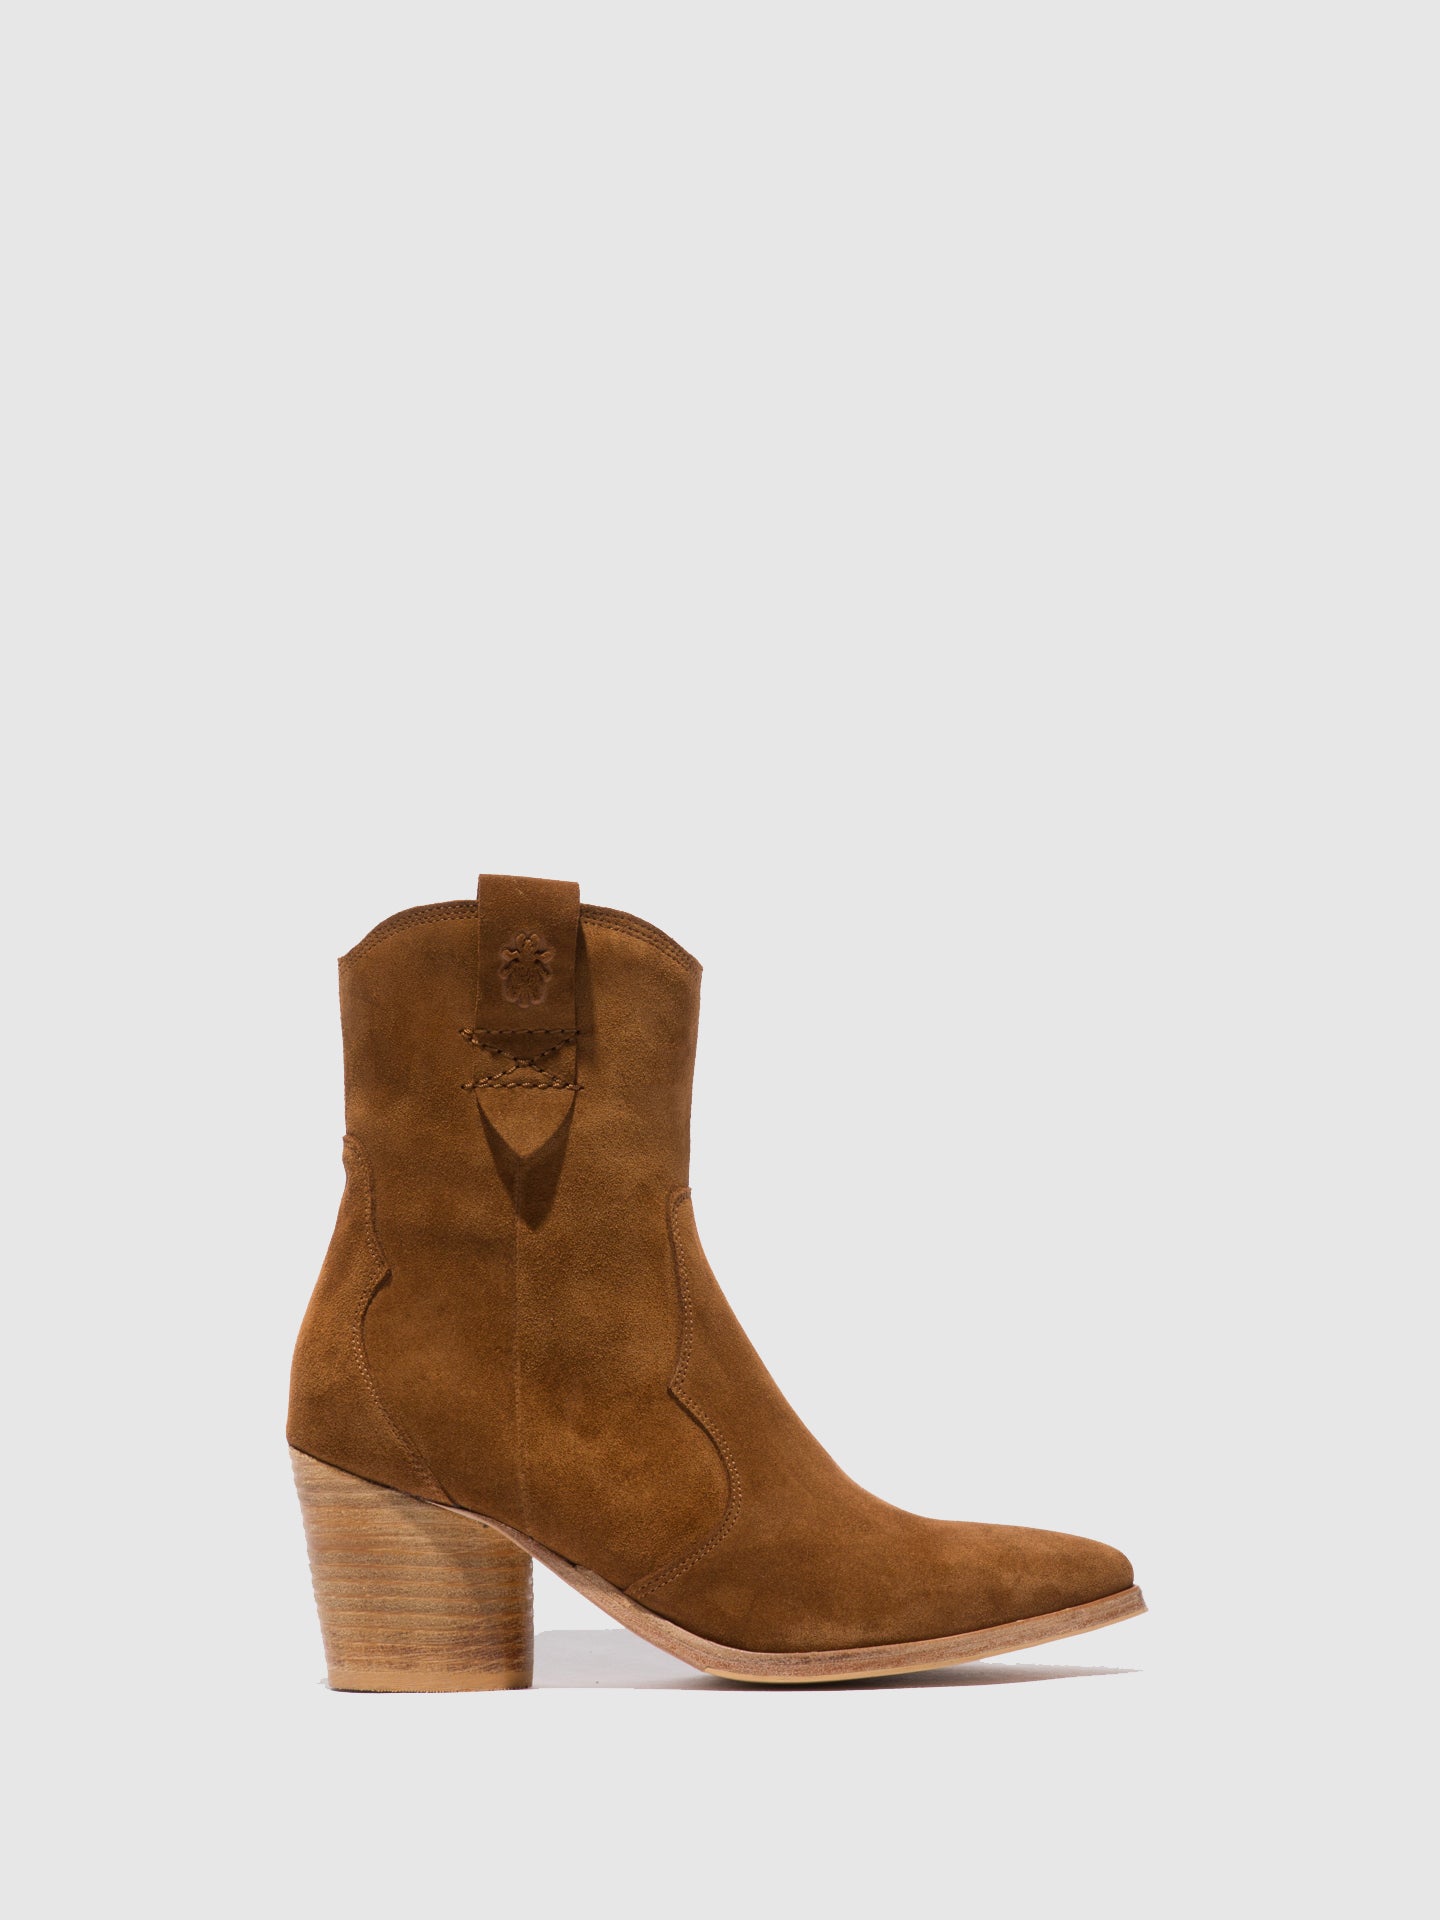 Fly London Zip Up Ankle Boots ALBA825FLY SUEDE COGNAC